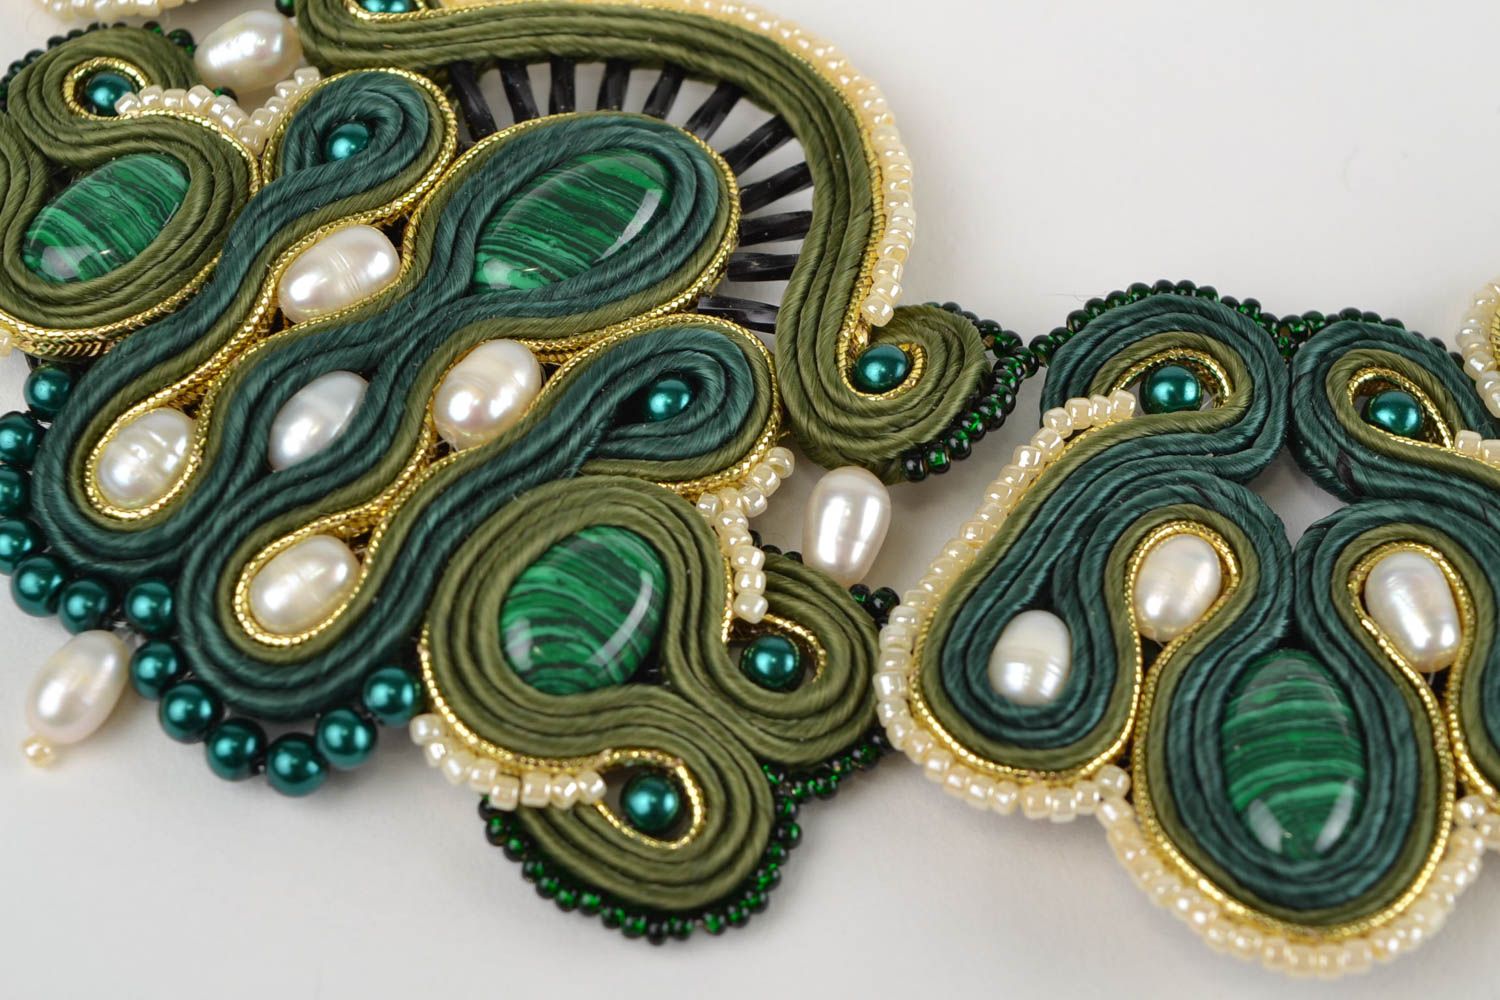 Handmade designer massive soutache necklace with natural stones and pearls photo 3